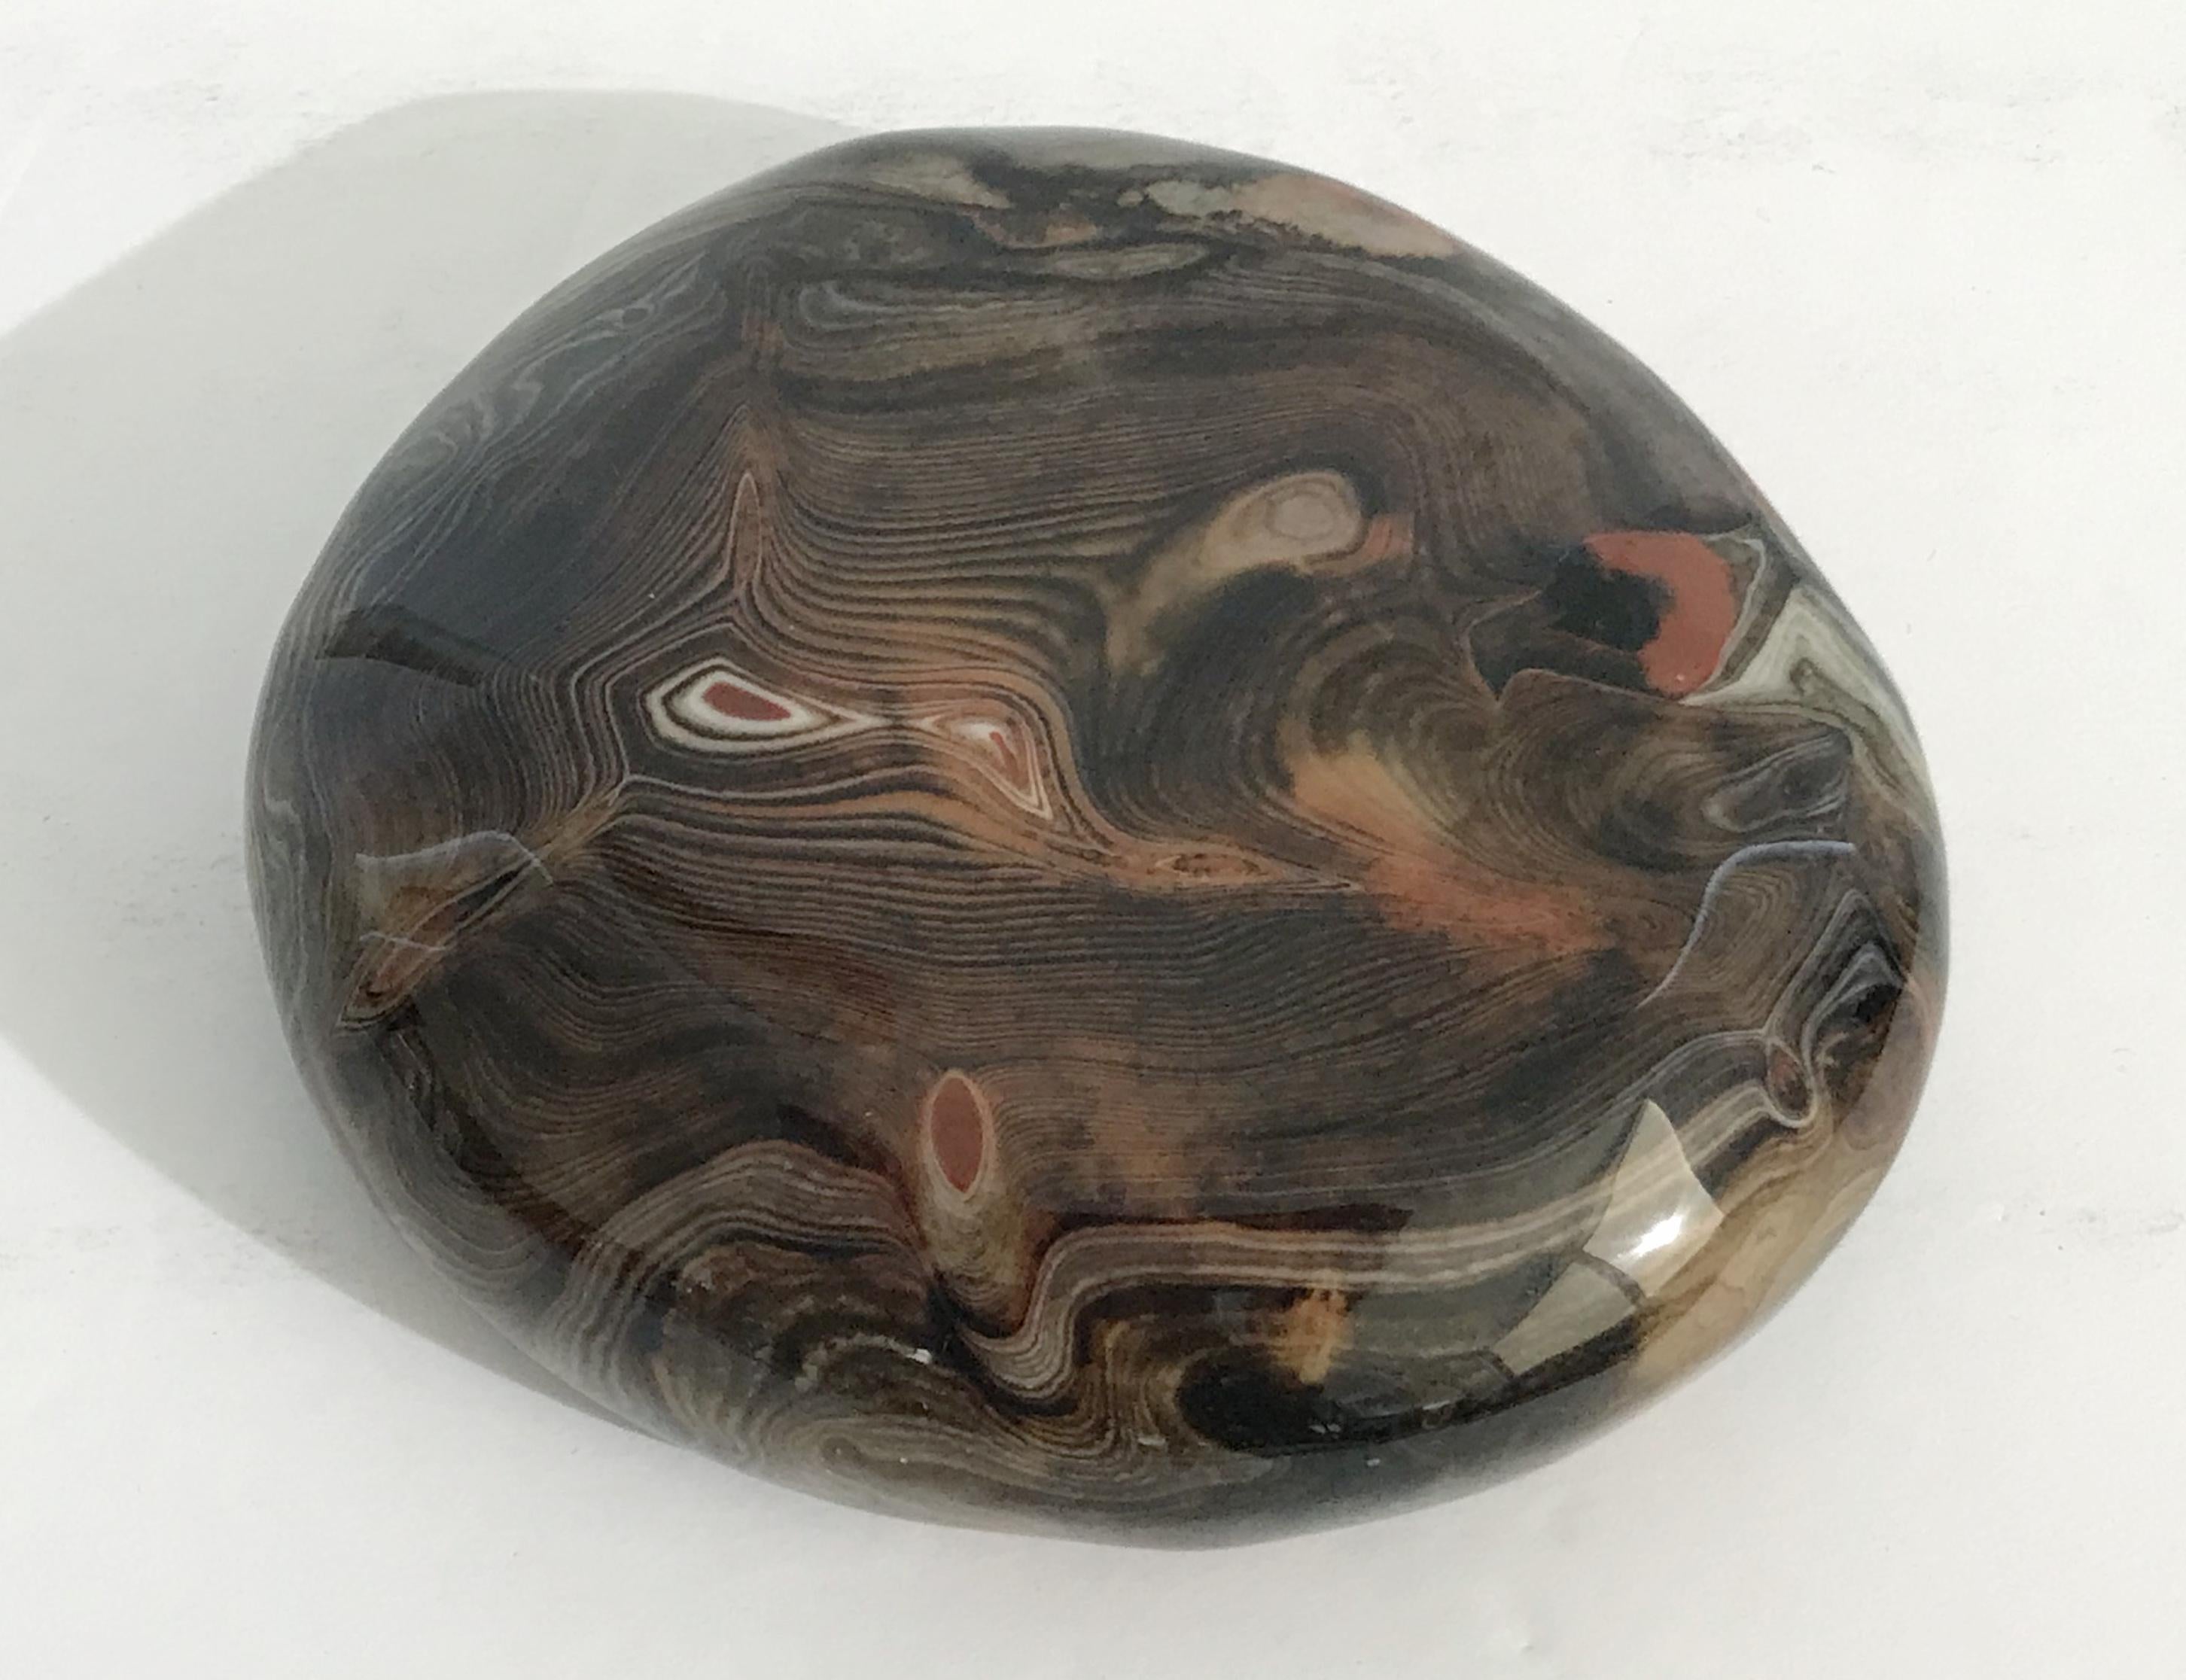 Hand polished agate onyx stone paperweight in black, brown, and red intricate layered patterns
Measures: length 5 inches, width 4.5 inches, height 1 inch
1 in stock in Palm Springs ON 50% OFF SALE for $225 !!
This piece makes for a great and unique